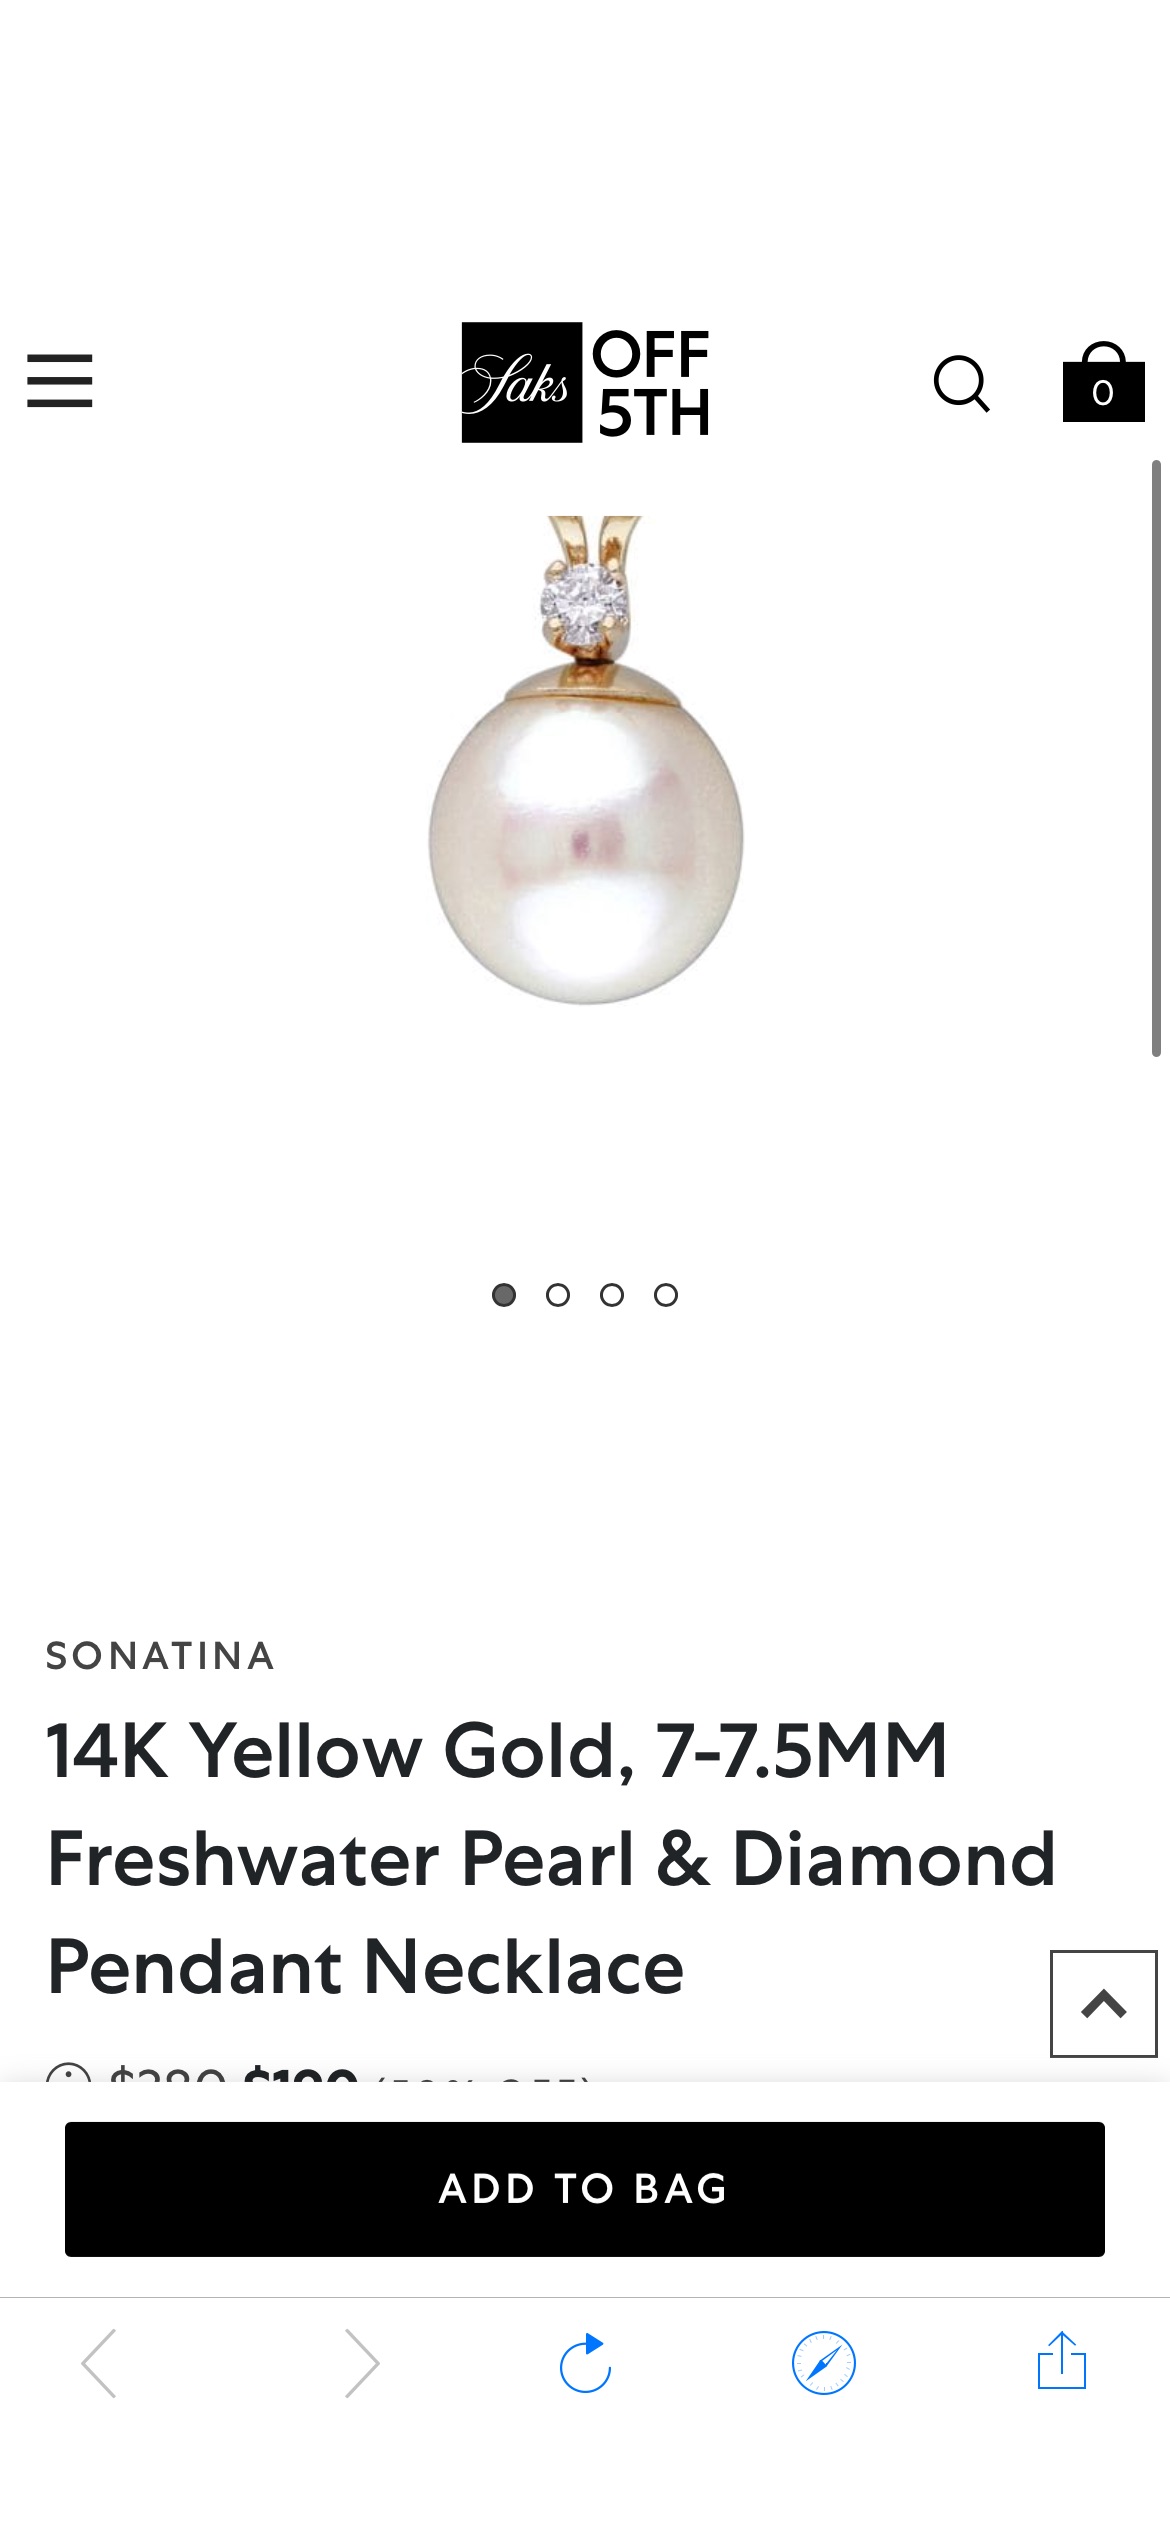 Sonatina 14K Yellow Gold, 7-7.5MM Freshwater Pearl & Diamond Pendant Necklace on SALE | Saks OFF 5TH